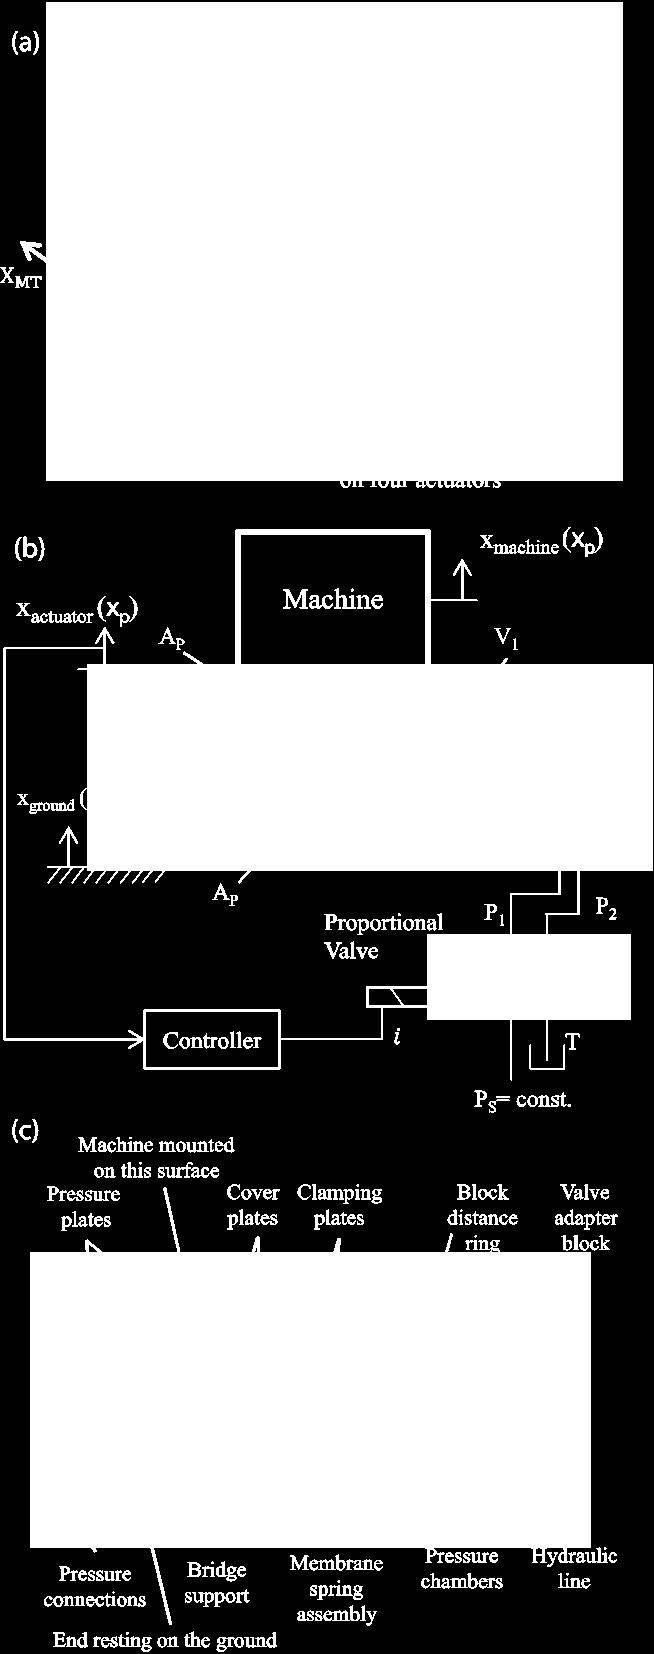 Ground motion detected by a sensor at the machine mounting location(s) acts as an input to the controller that drives a proportional valve that controls the fluid flow to the actuator.